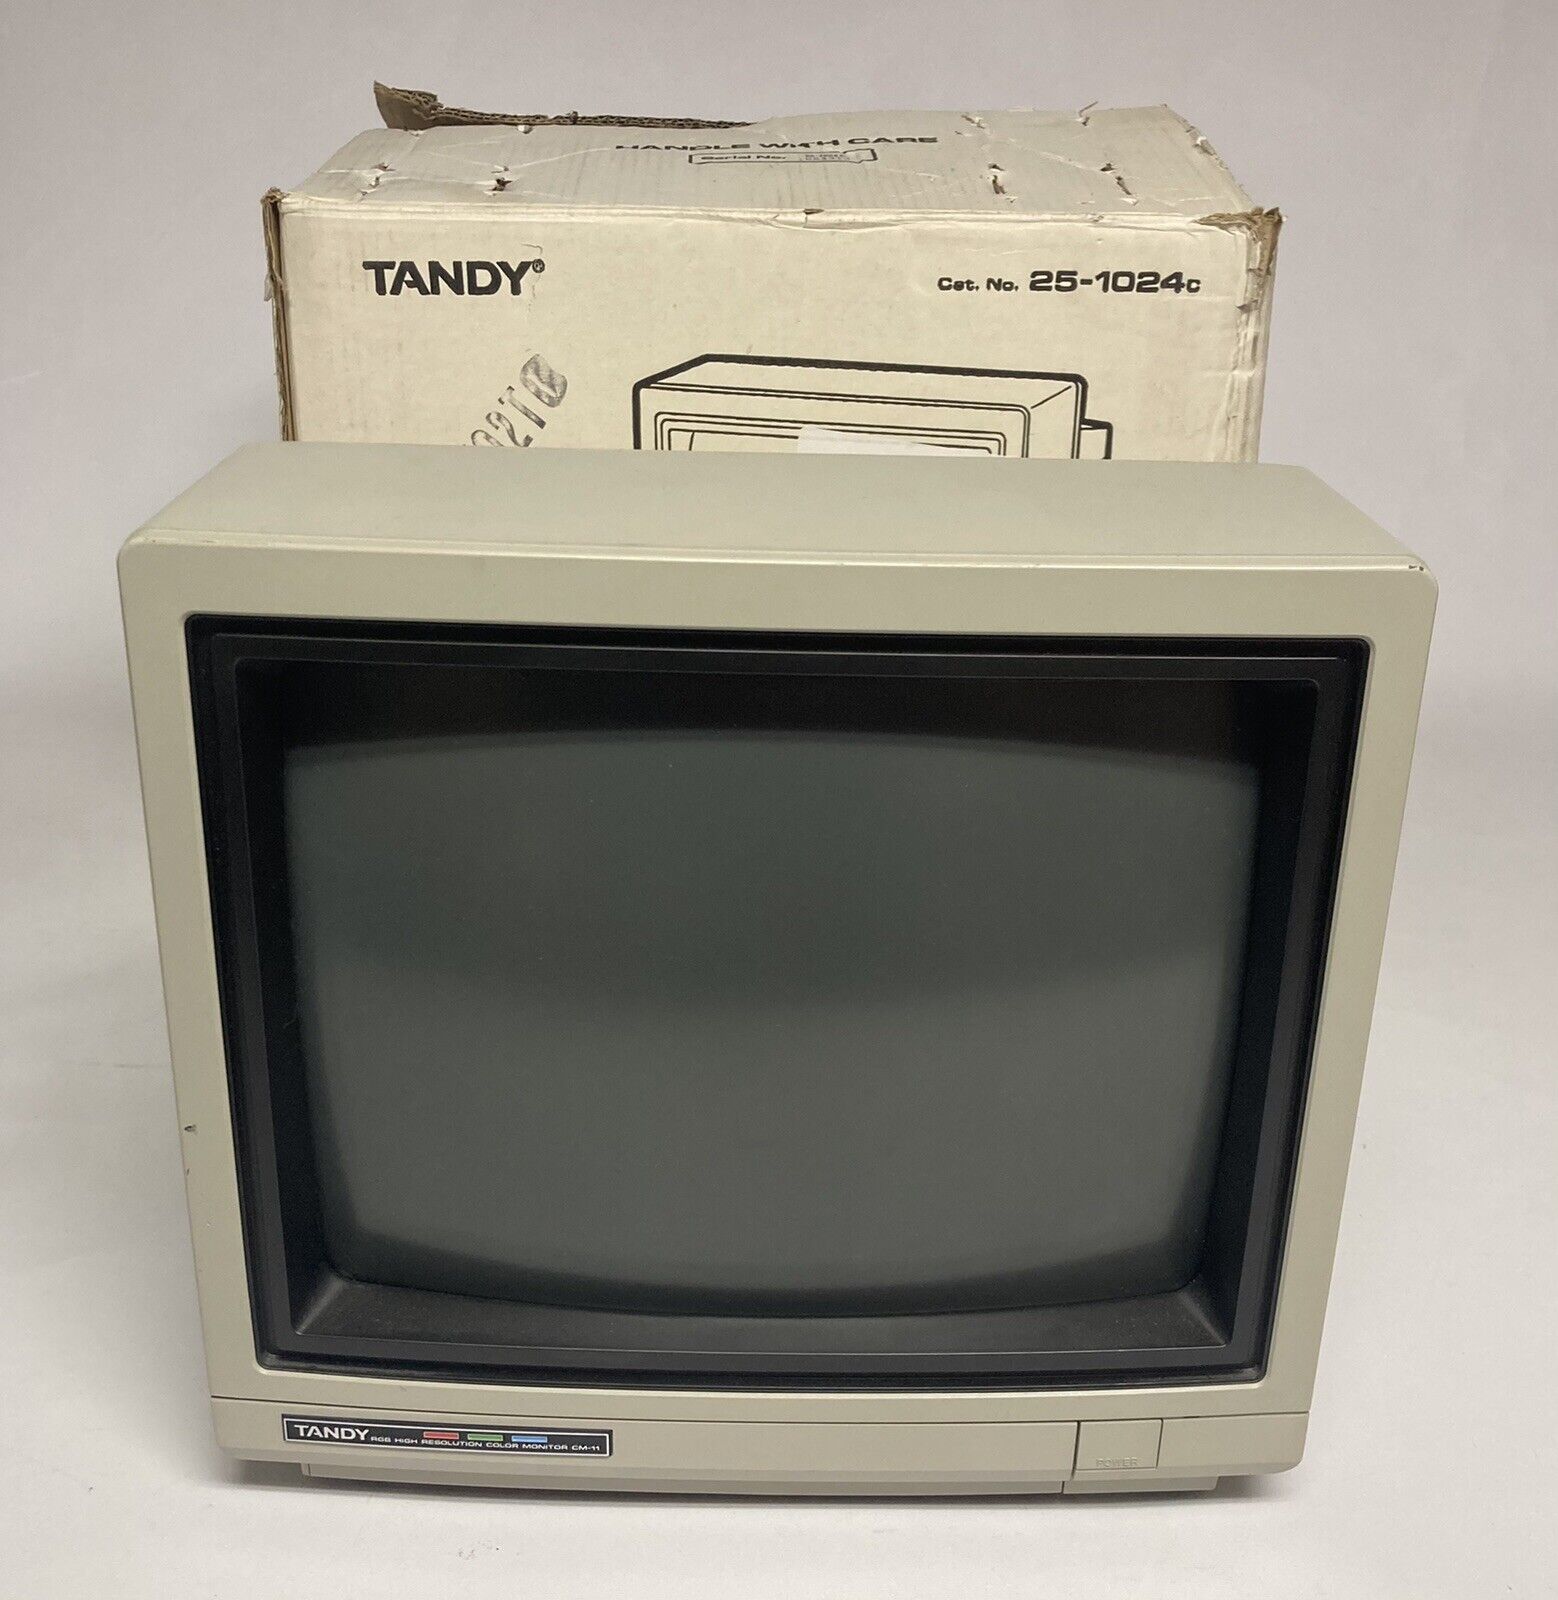 TESTED Vintage Tandy RGB Color Monitor CM-11 25-1024C Original Box Packaging